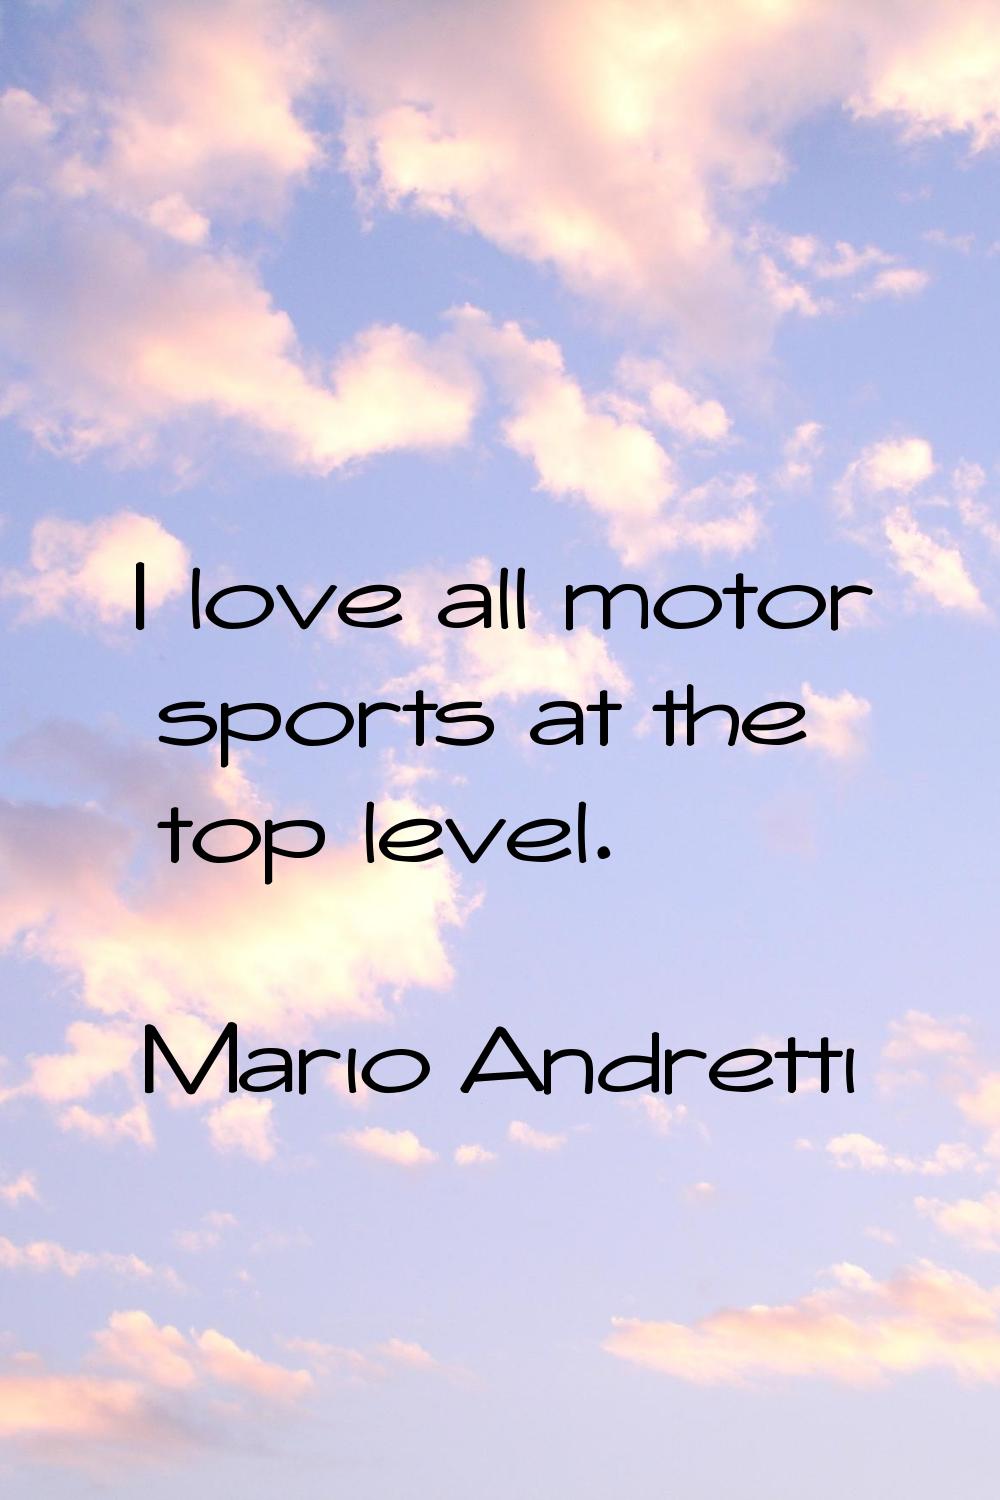 I love all motor sports at the top level.